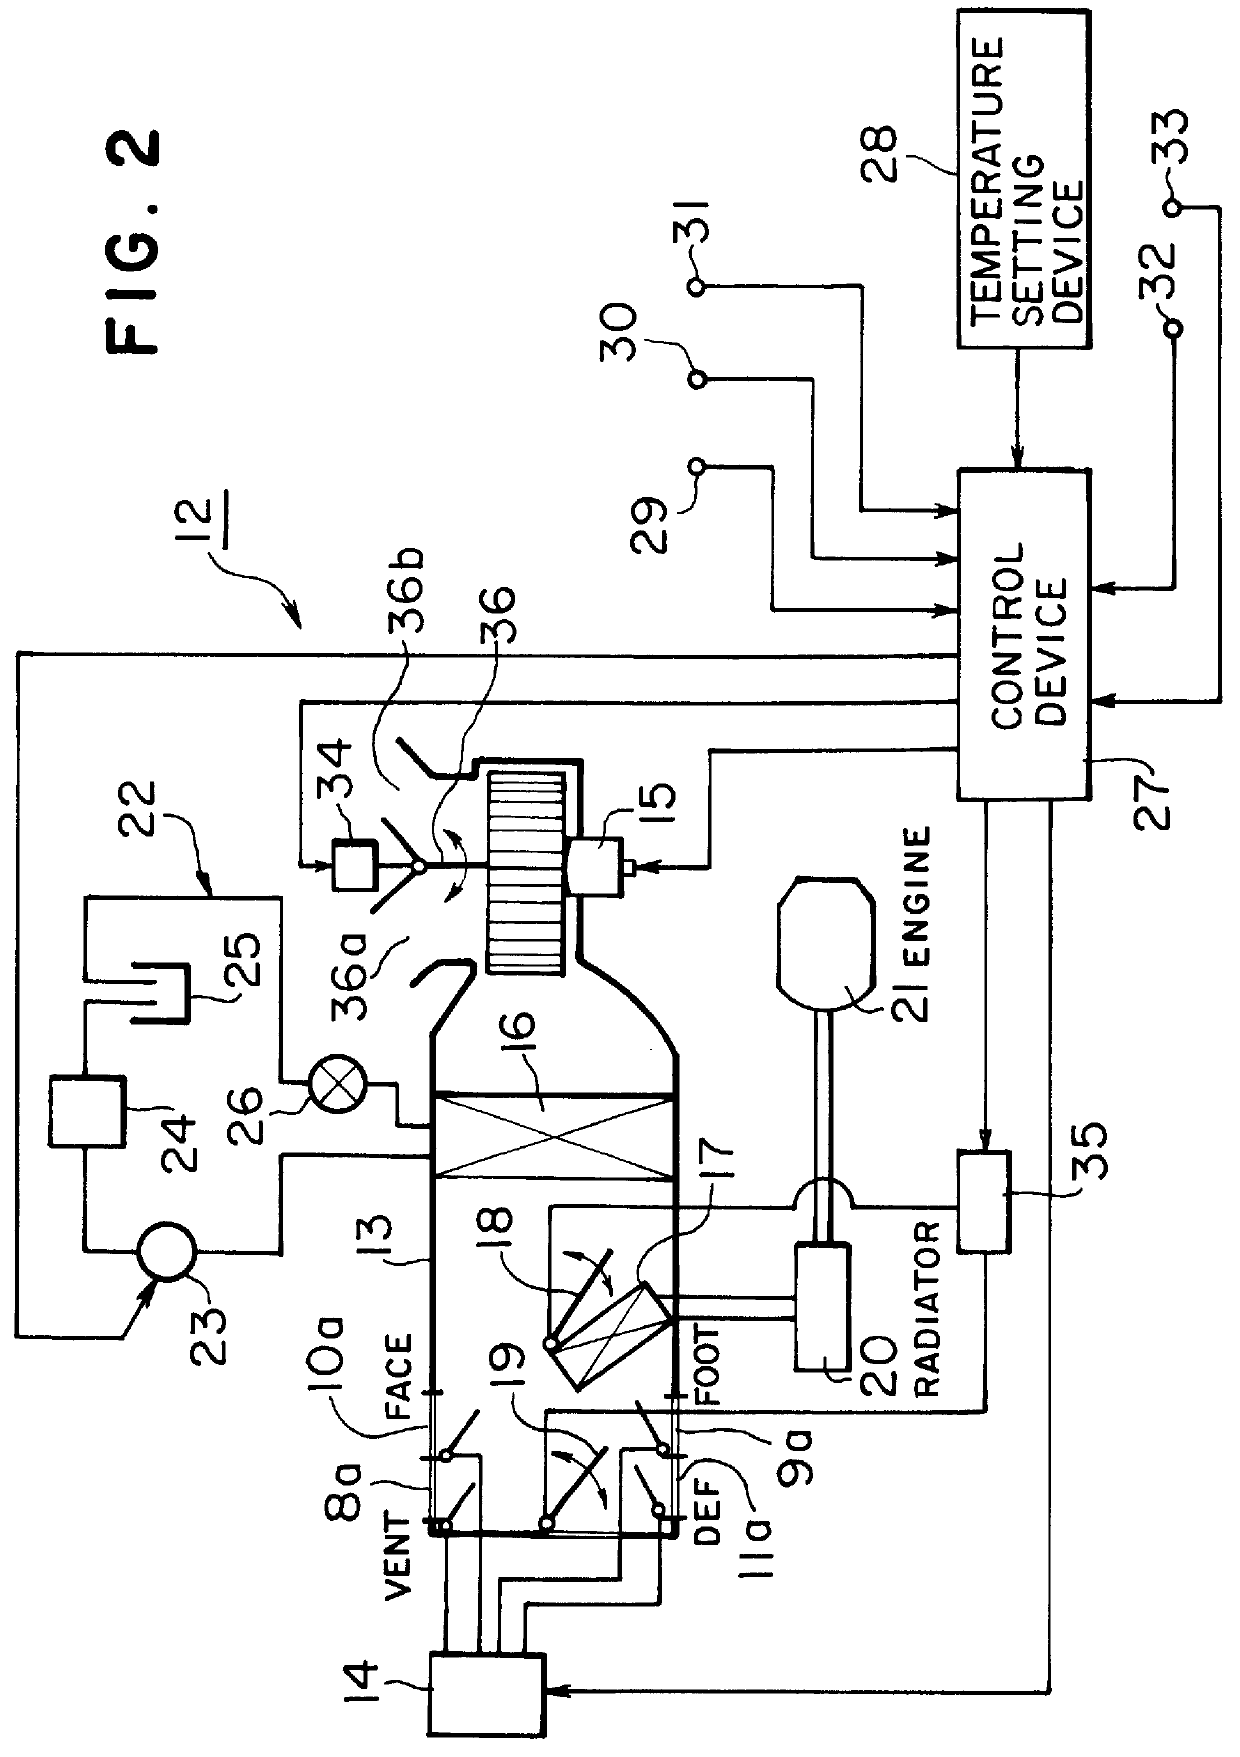 Air conditioning system for vehicles